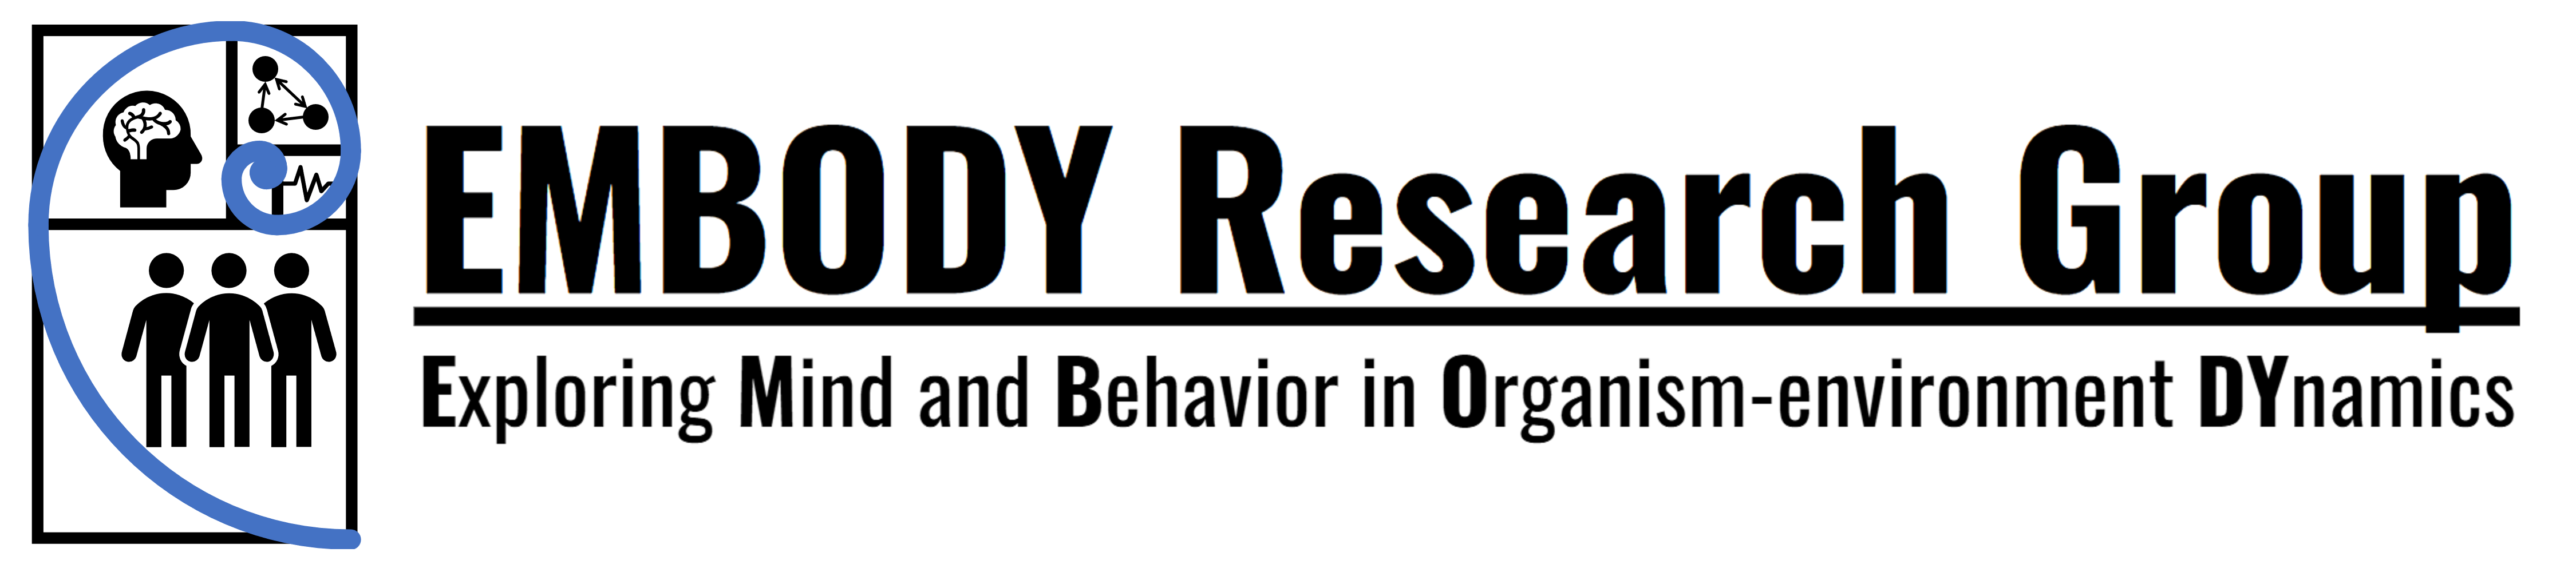 EMBODY Research Group logo